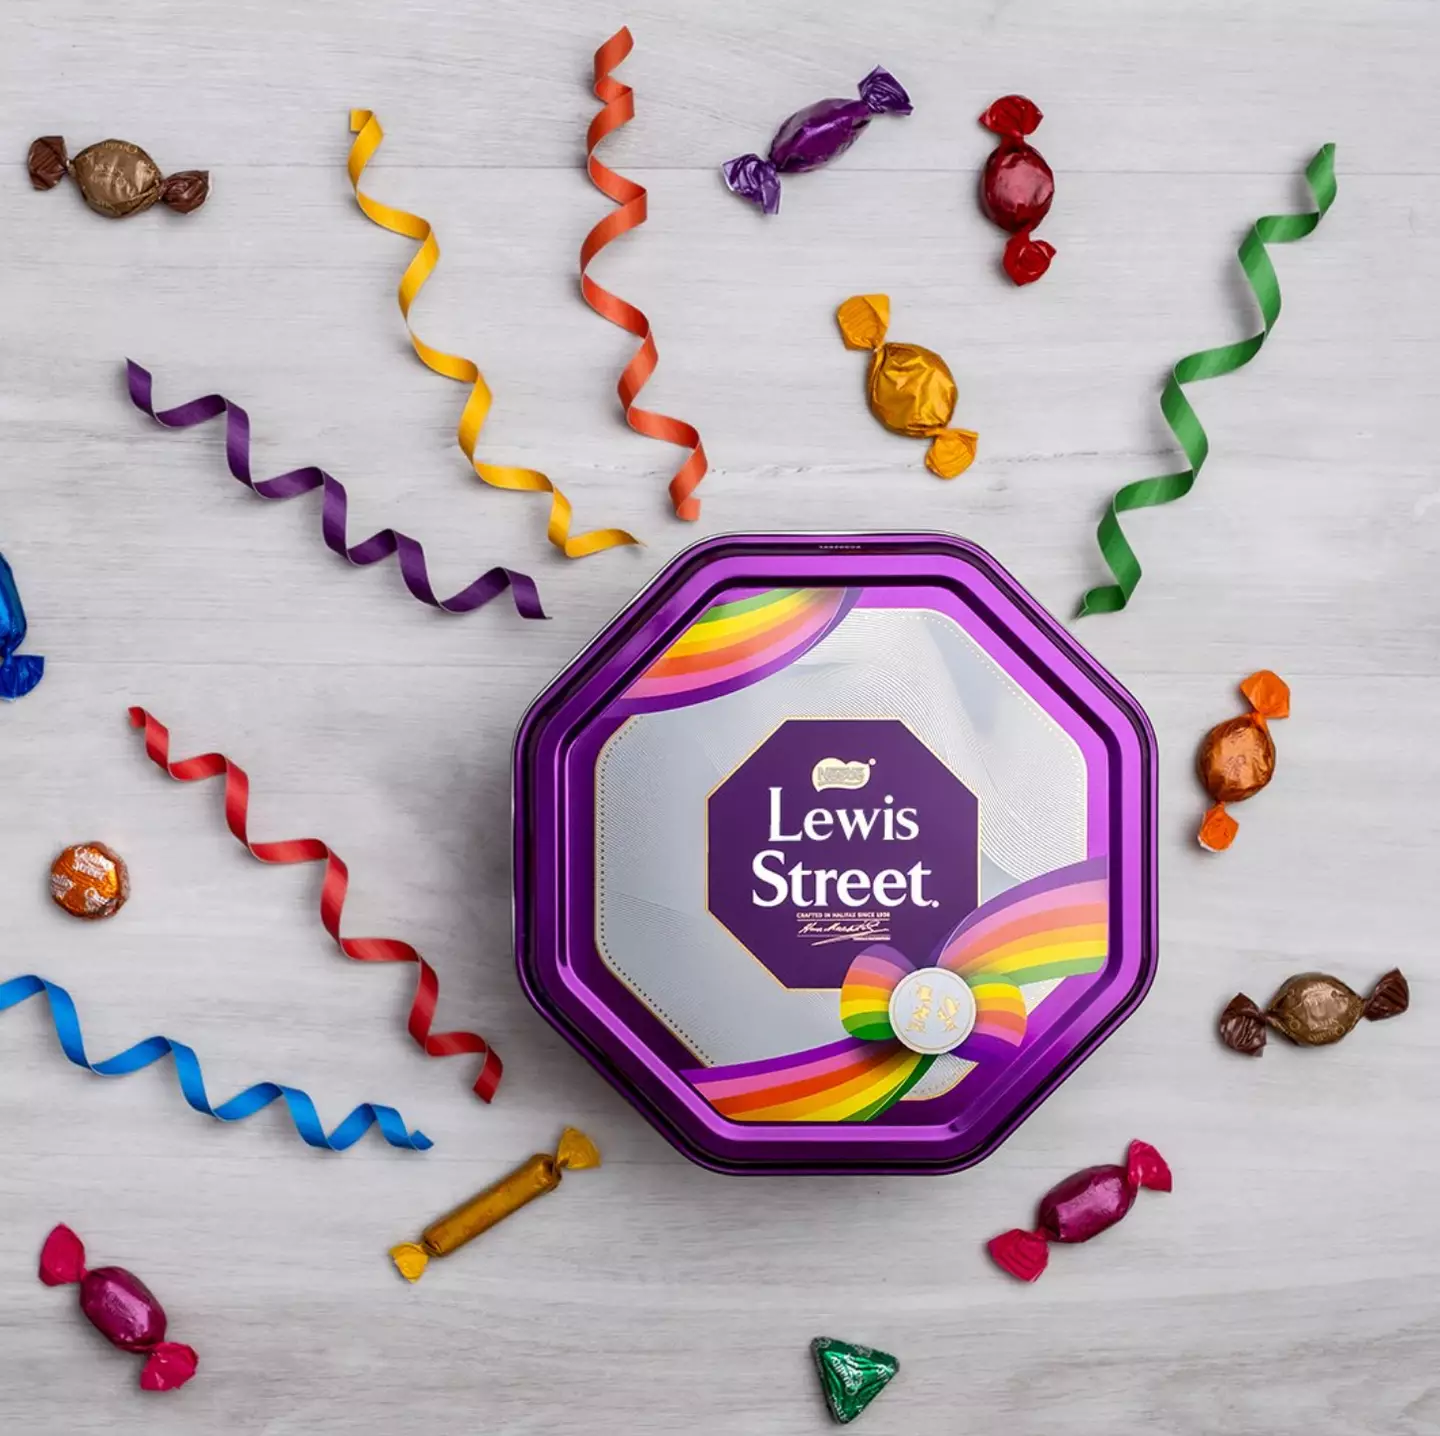 Quality Street pick and mix tins are back for Christmas.